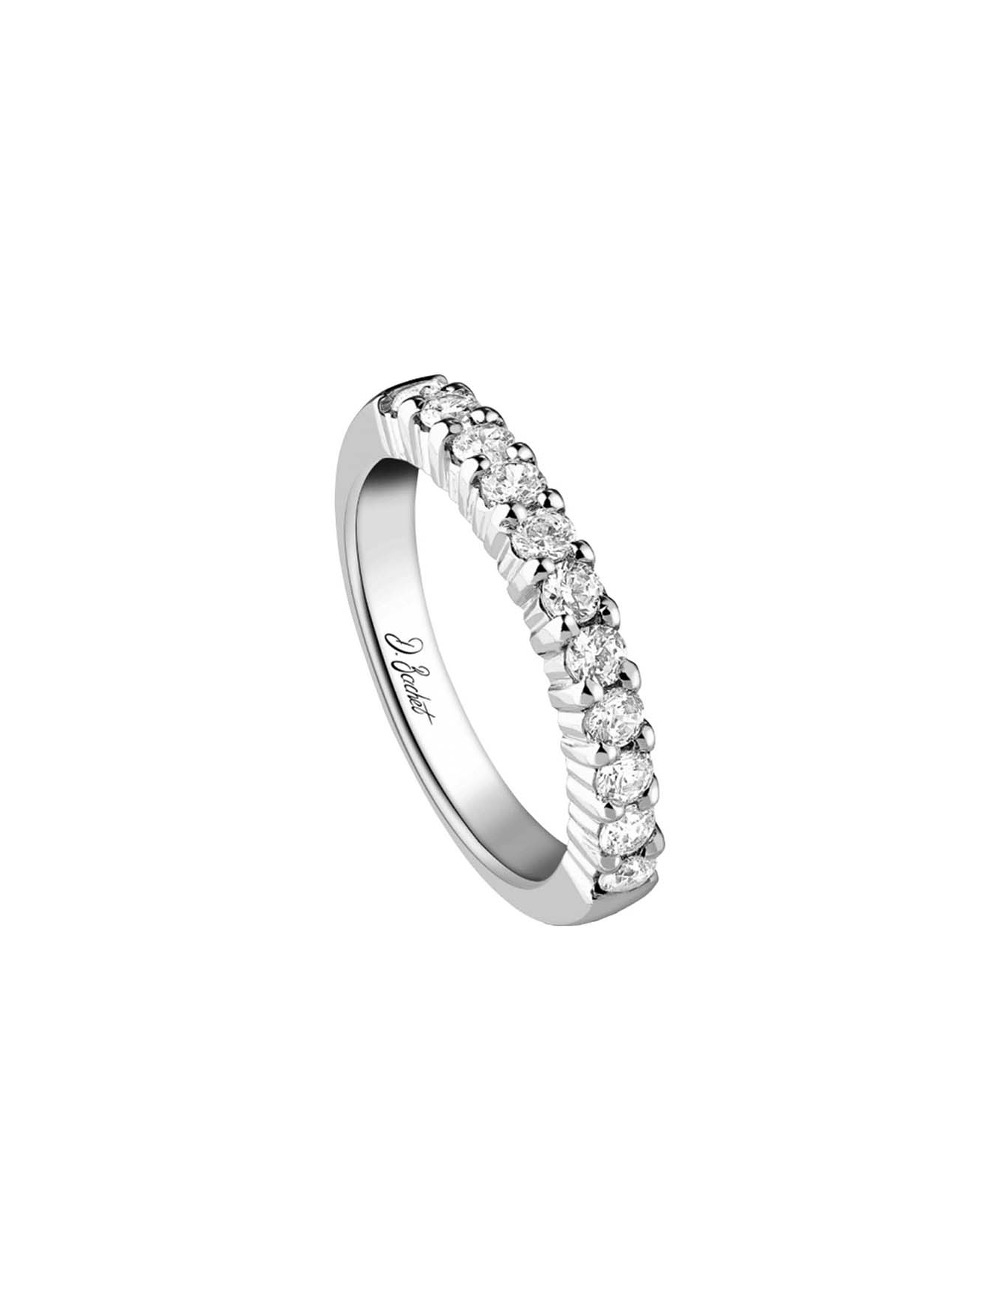 Woman's wedding band featuring sparkling prong-set white diamonds, highlighting delicate craftsmanship.